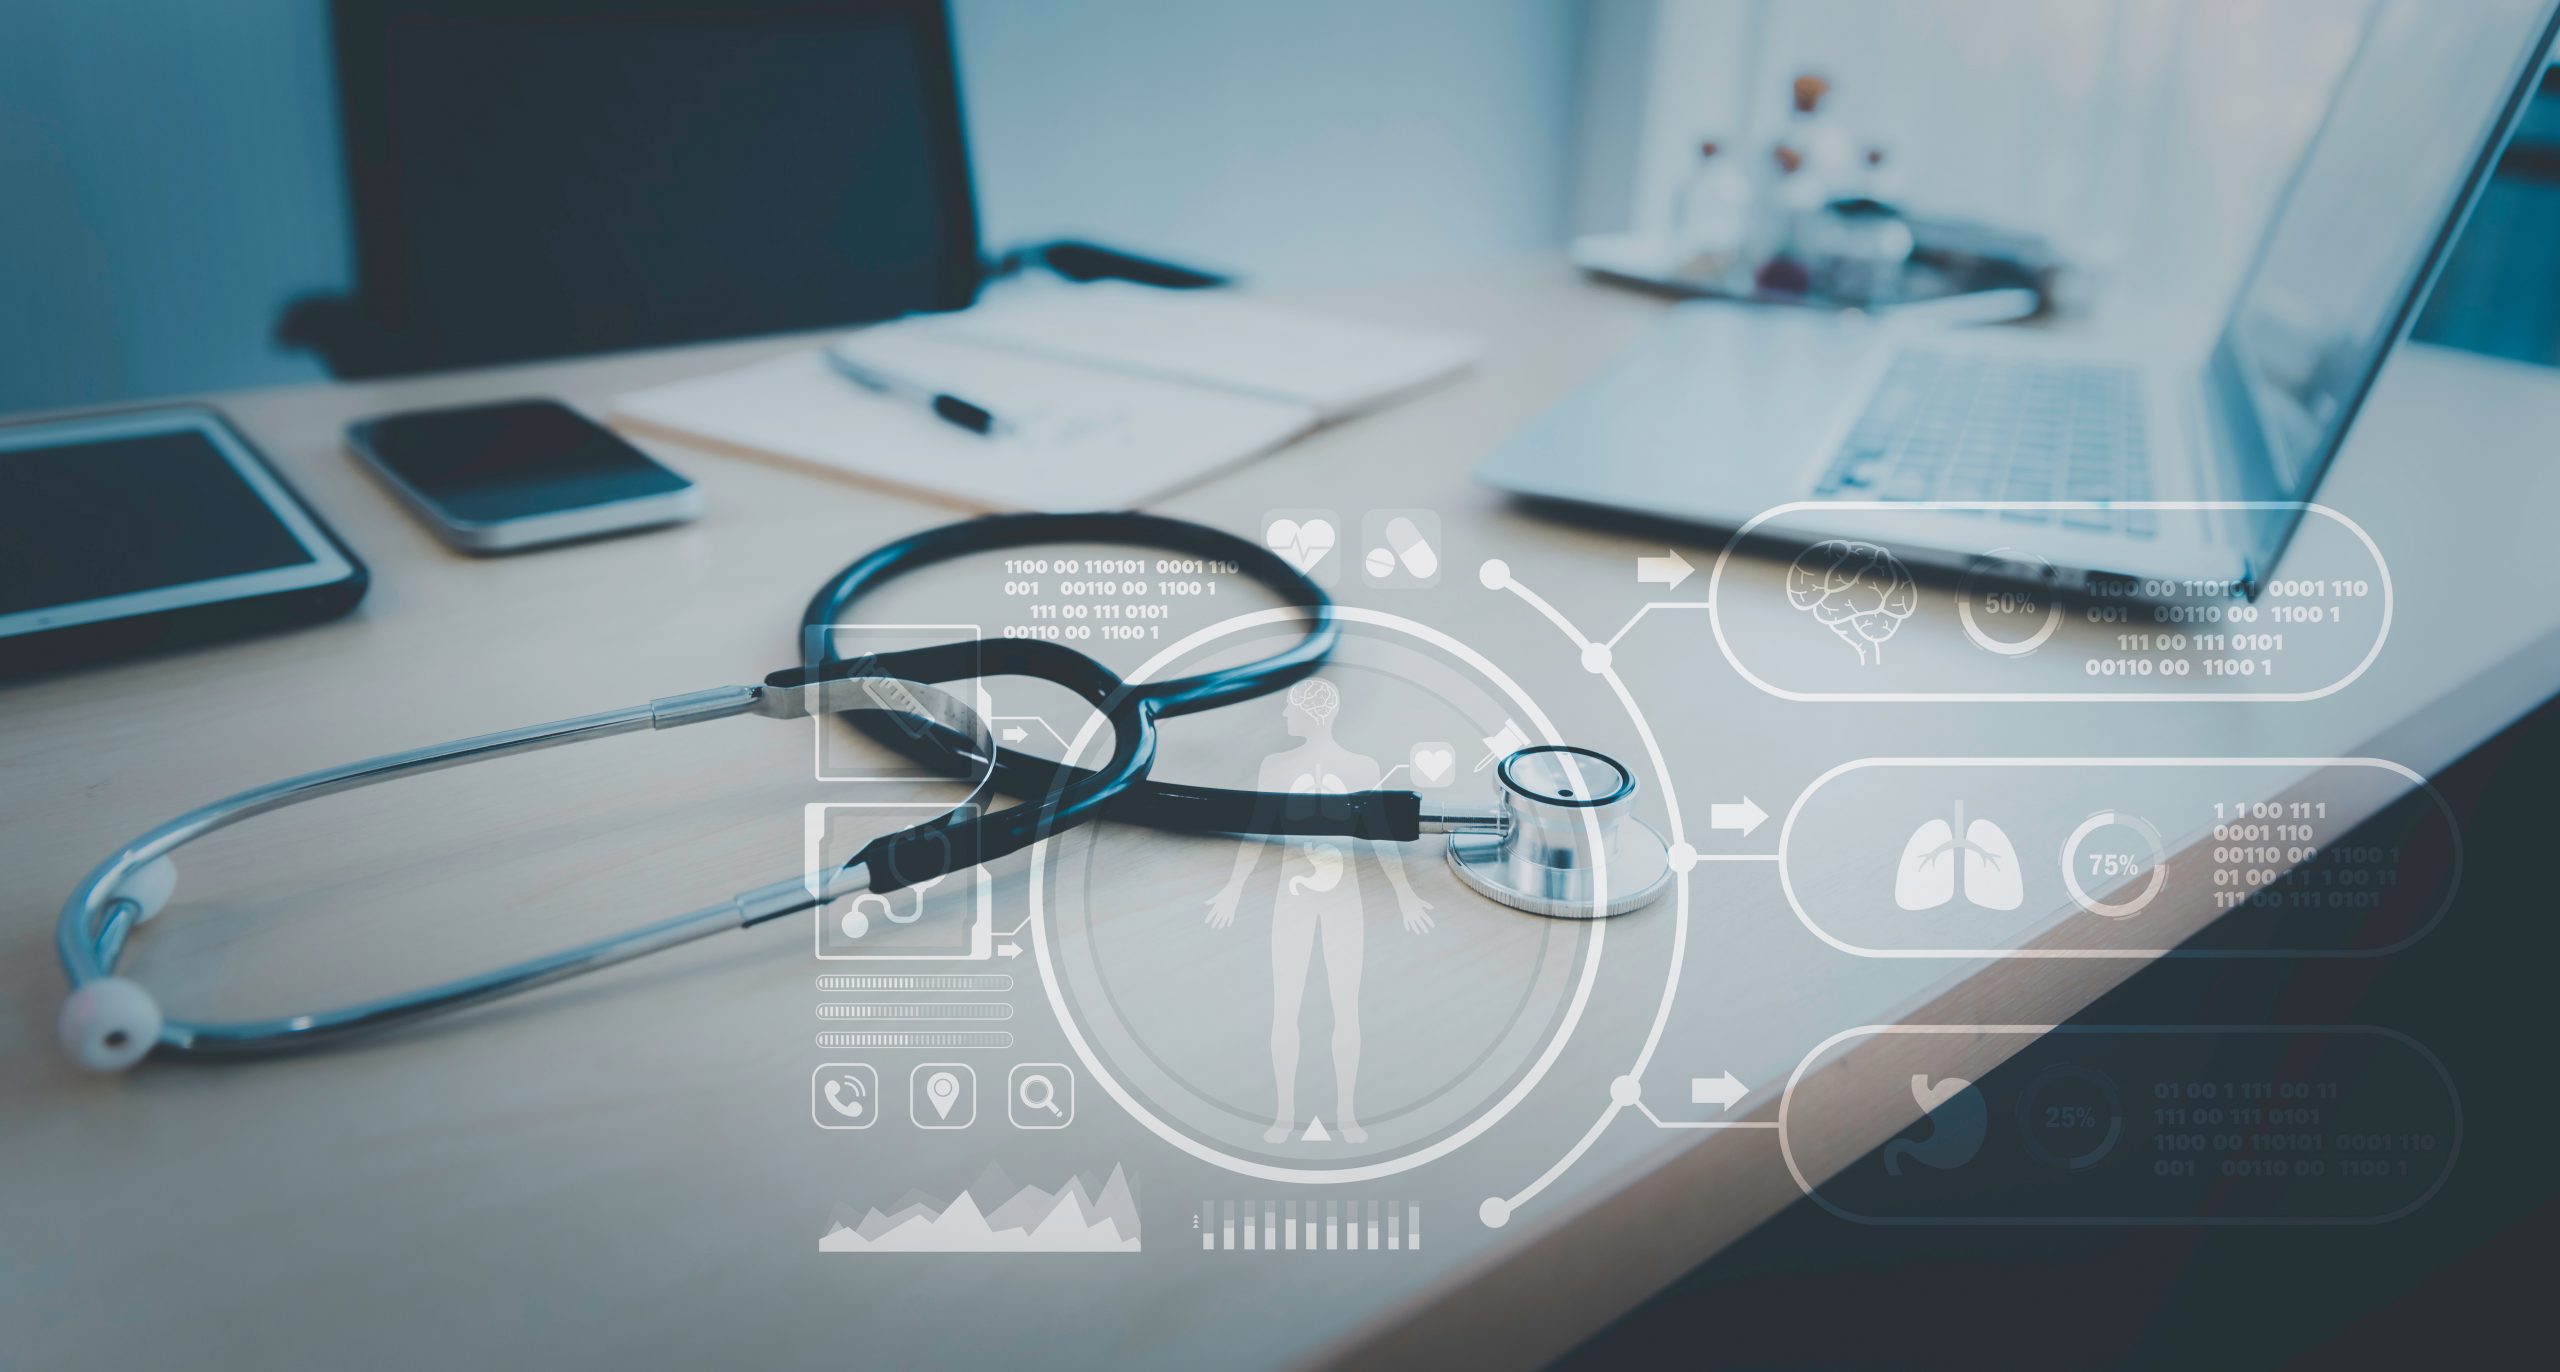 A stethoscope resting on a desk next to a laptop and a smartphone; an illustration of modern healthcare technology.